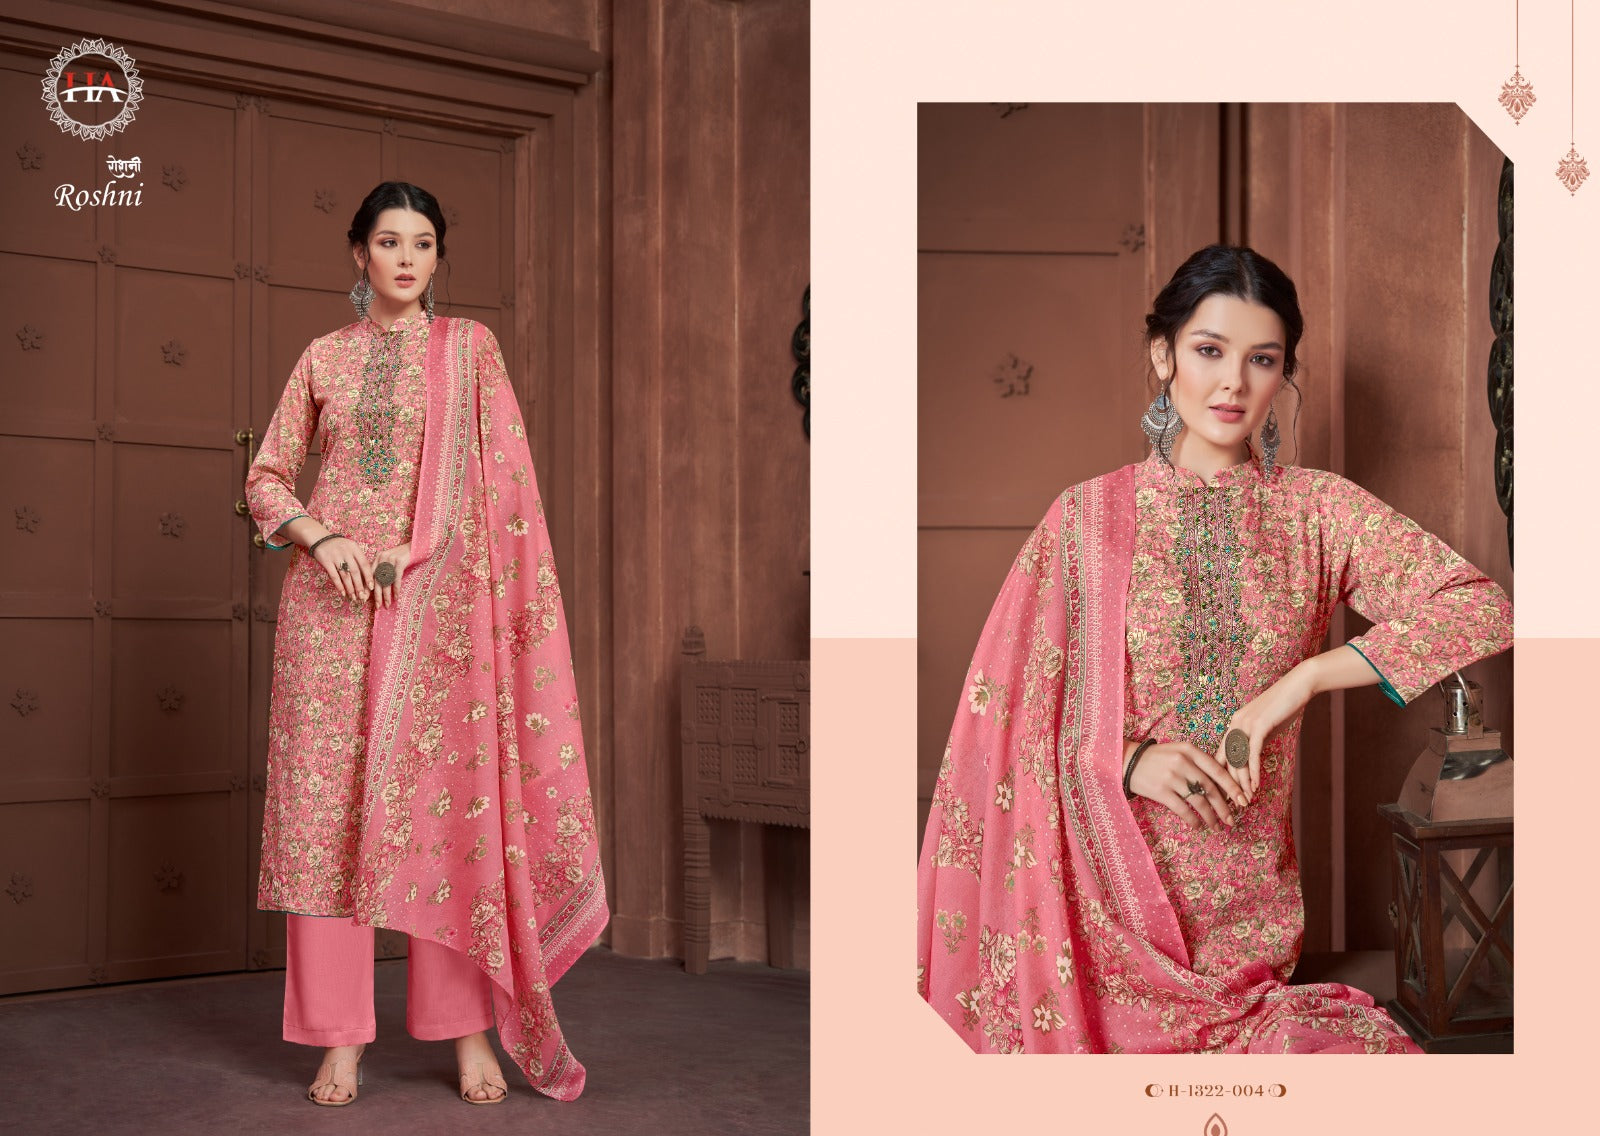 Harshit fashion hub roshni cotton with embroidery work salwar suits wholesale supplier - jilaniwholesalesuit